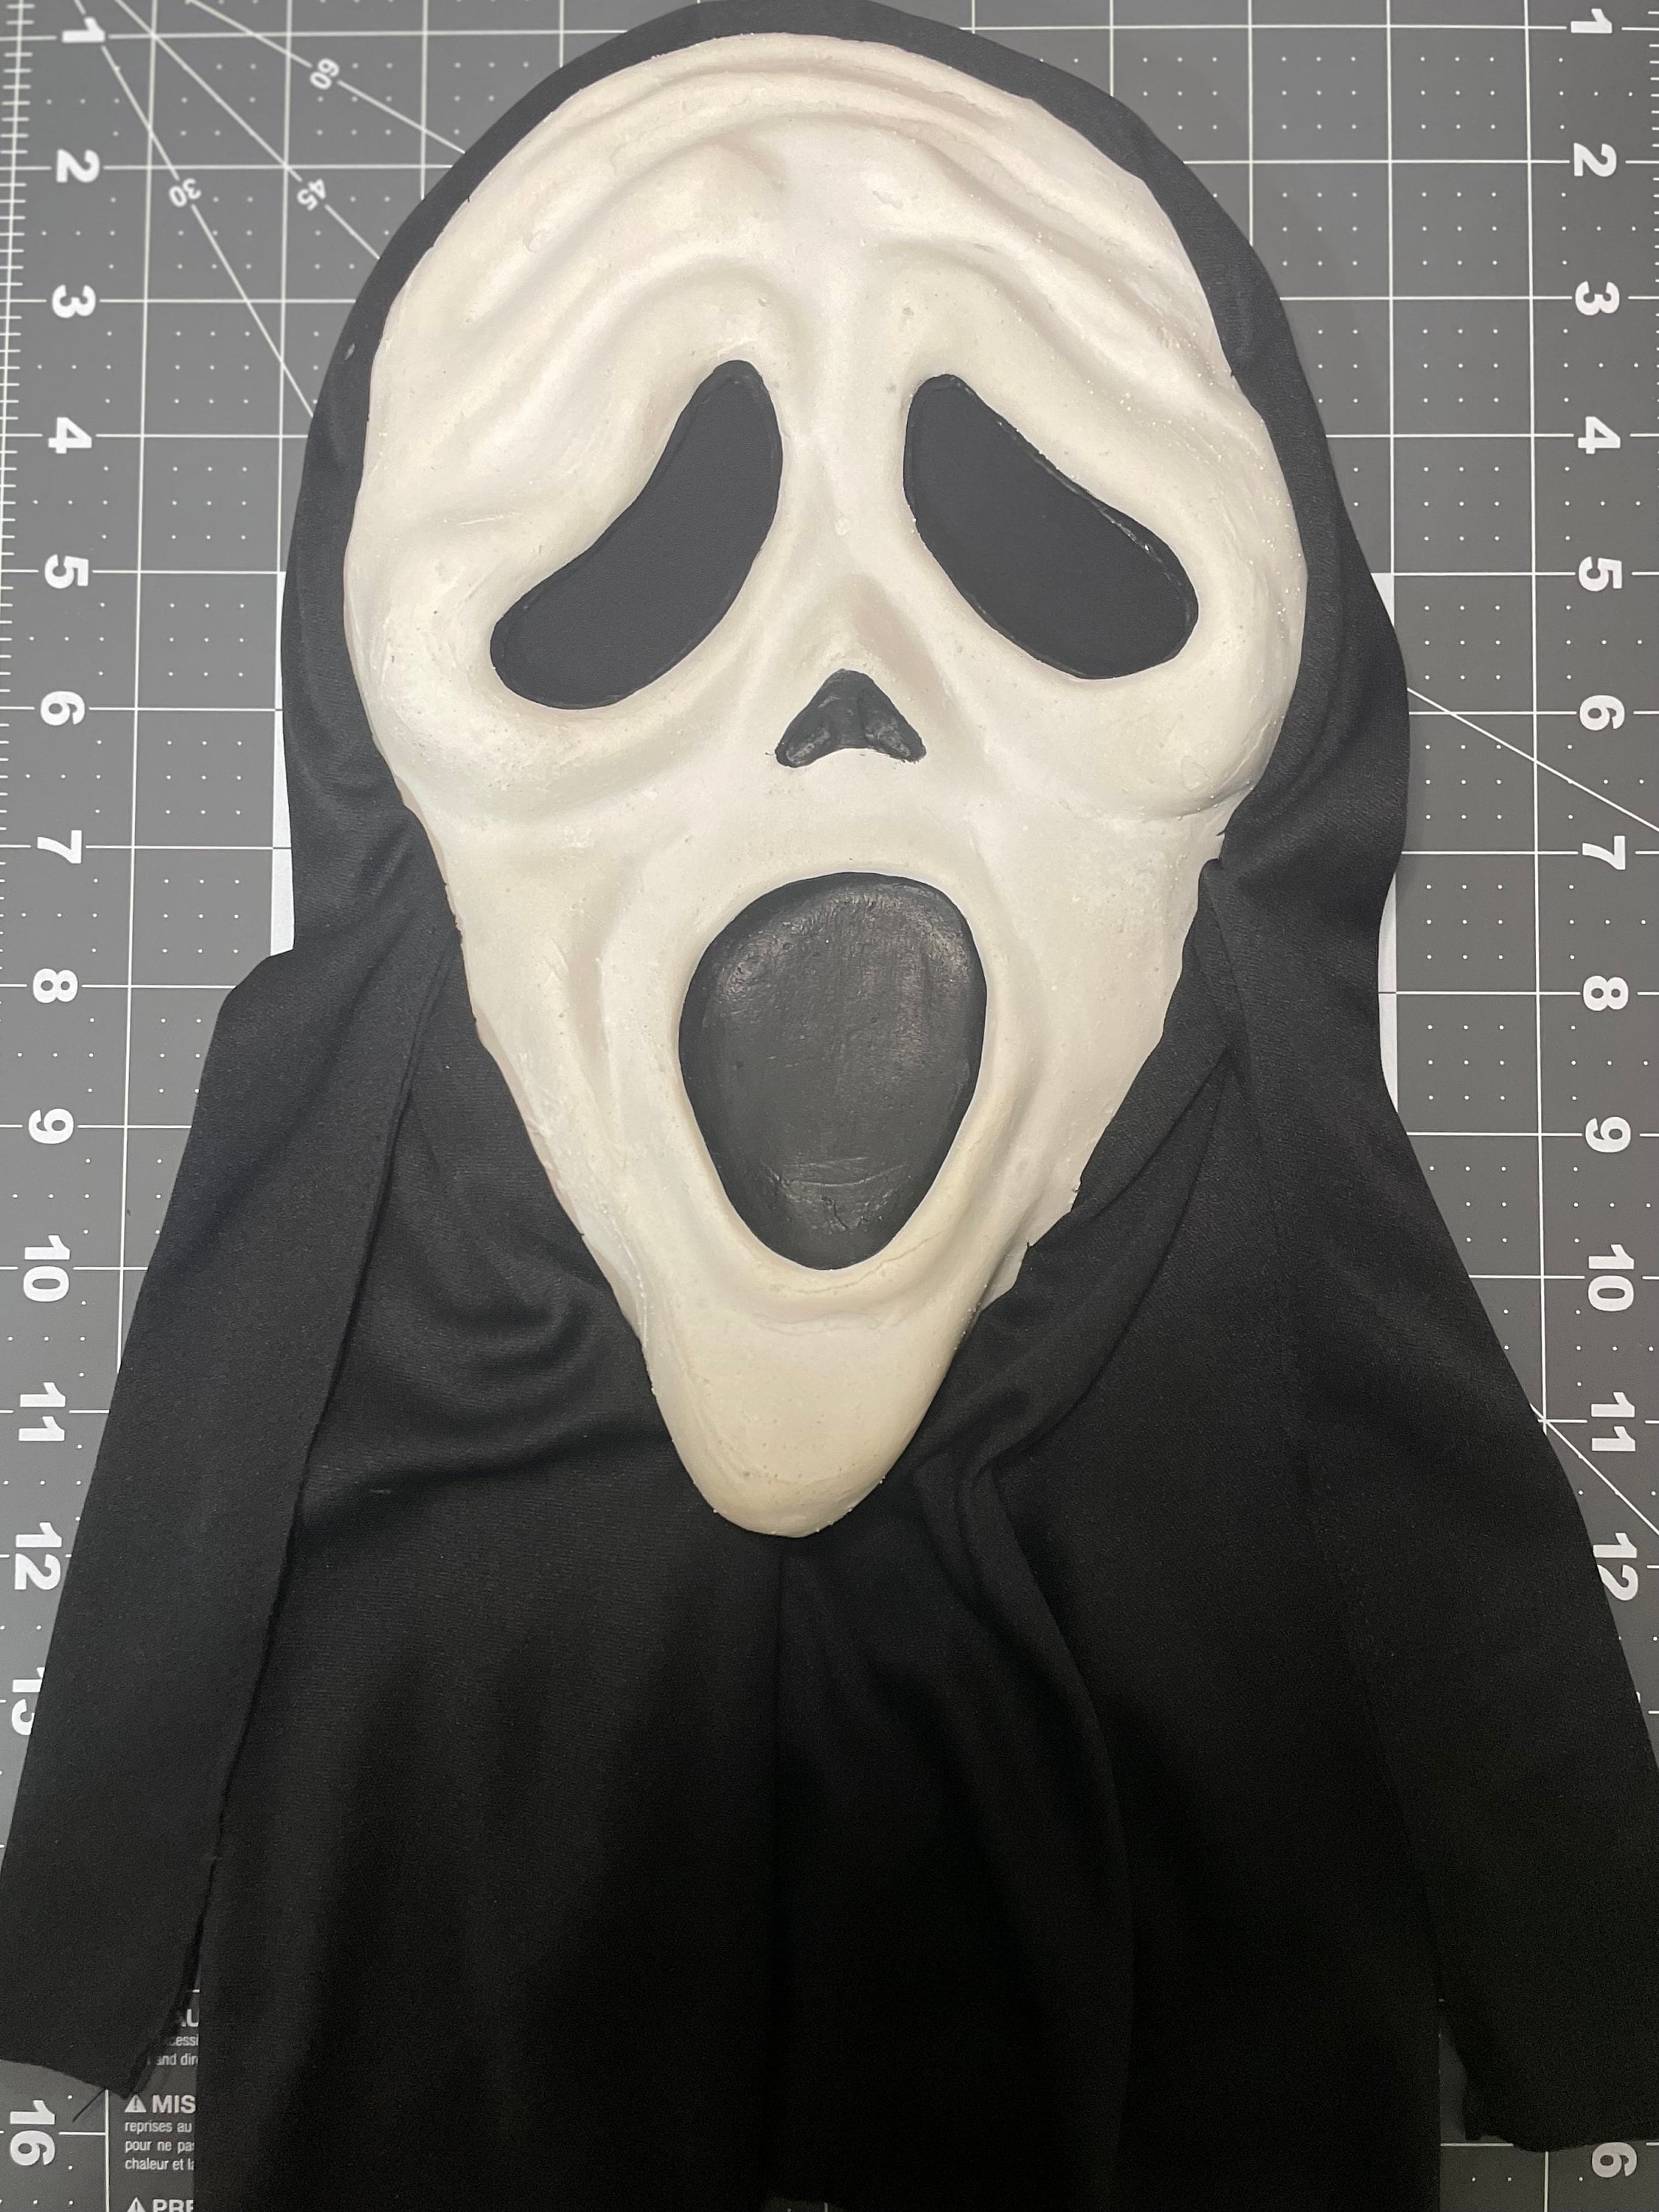 Horror Ghost Mask Realistic Movie Scream Scary Face Stick Tongue Out  ScaryCosplay killer Mask Demon Slayer